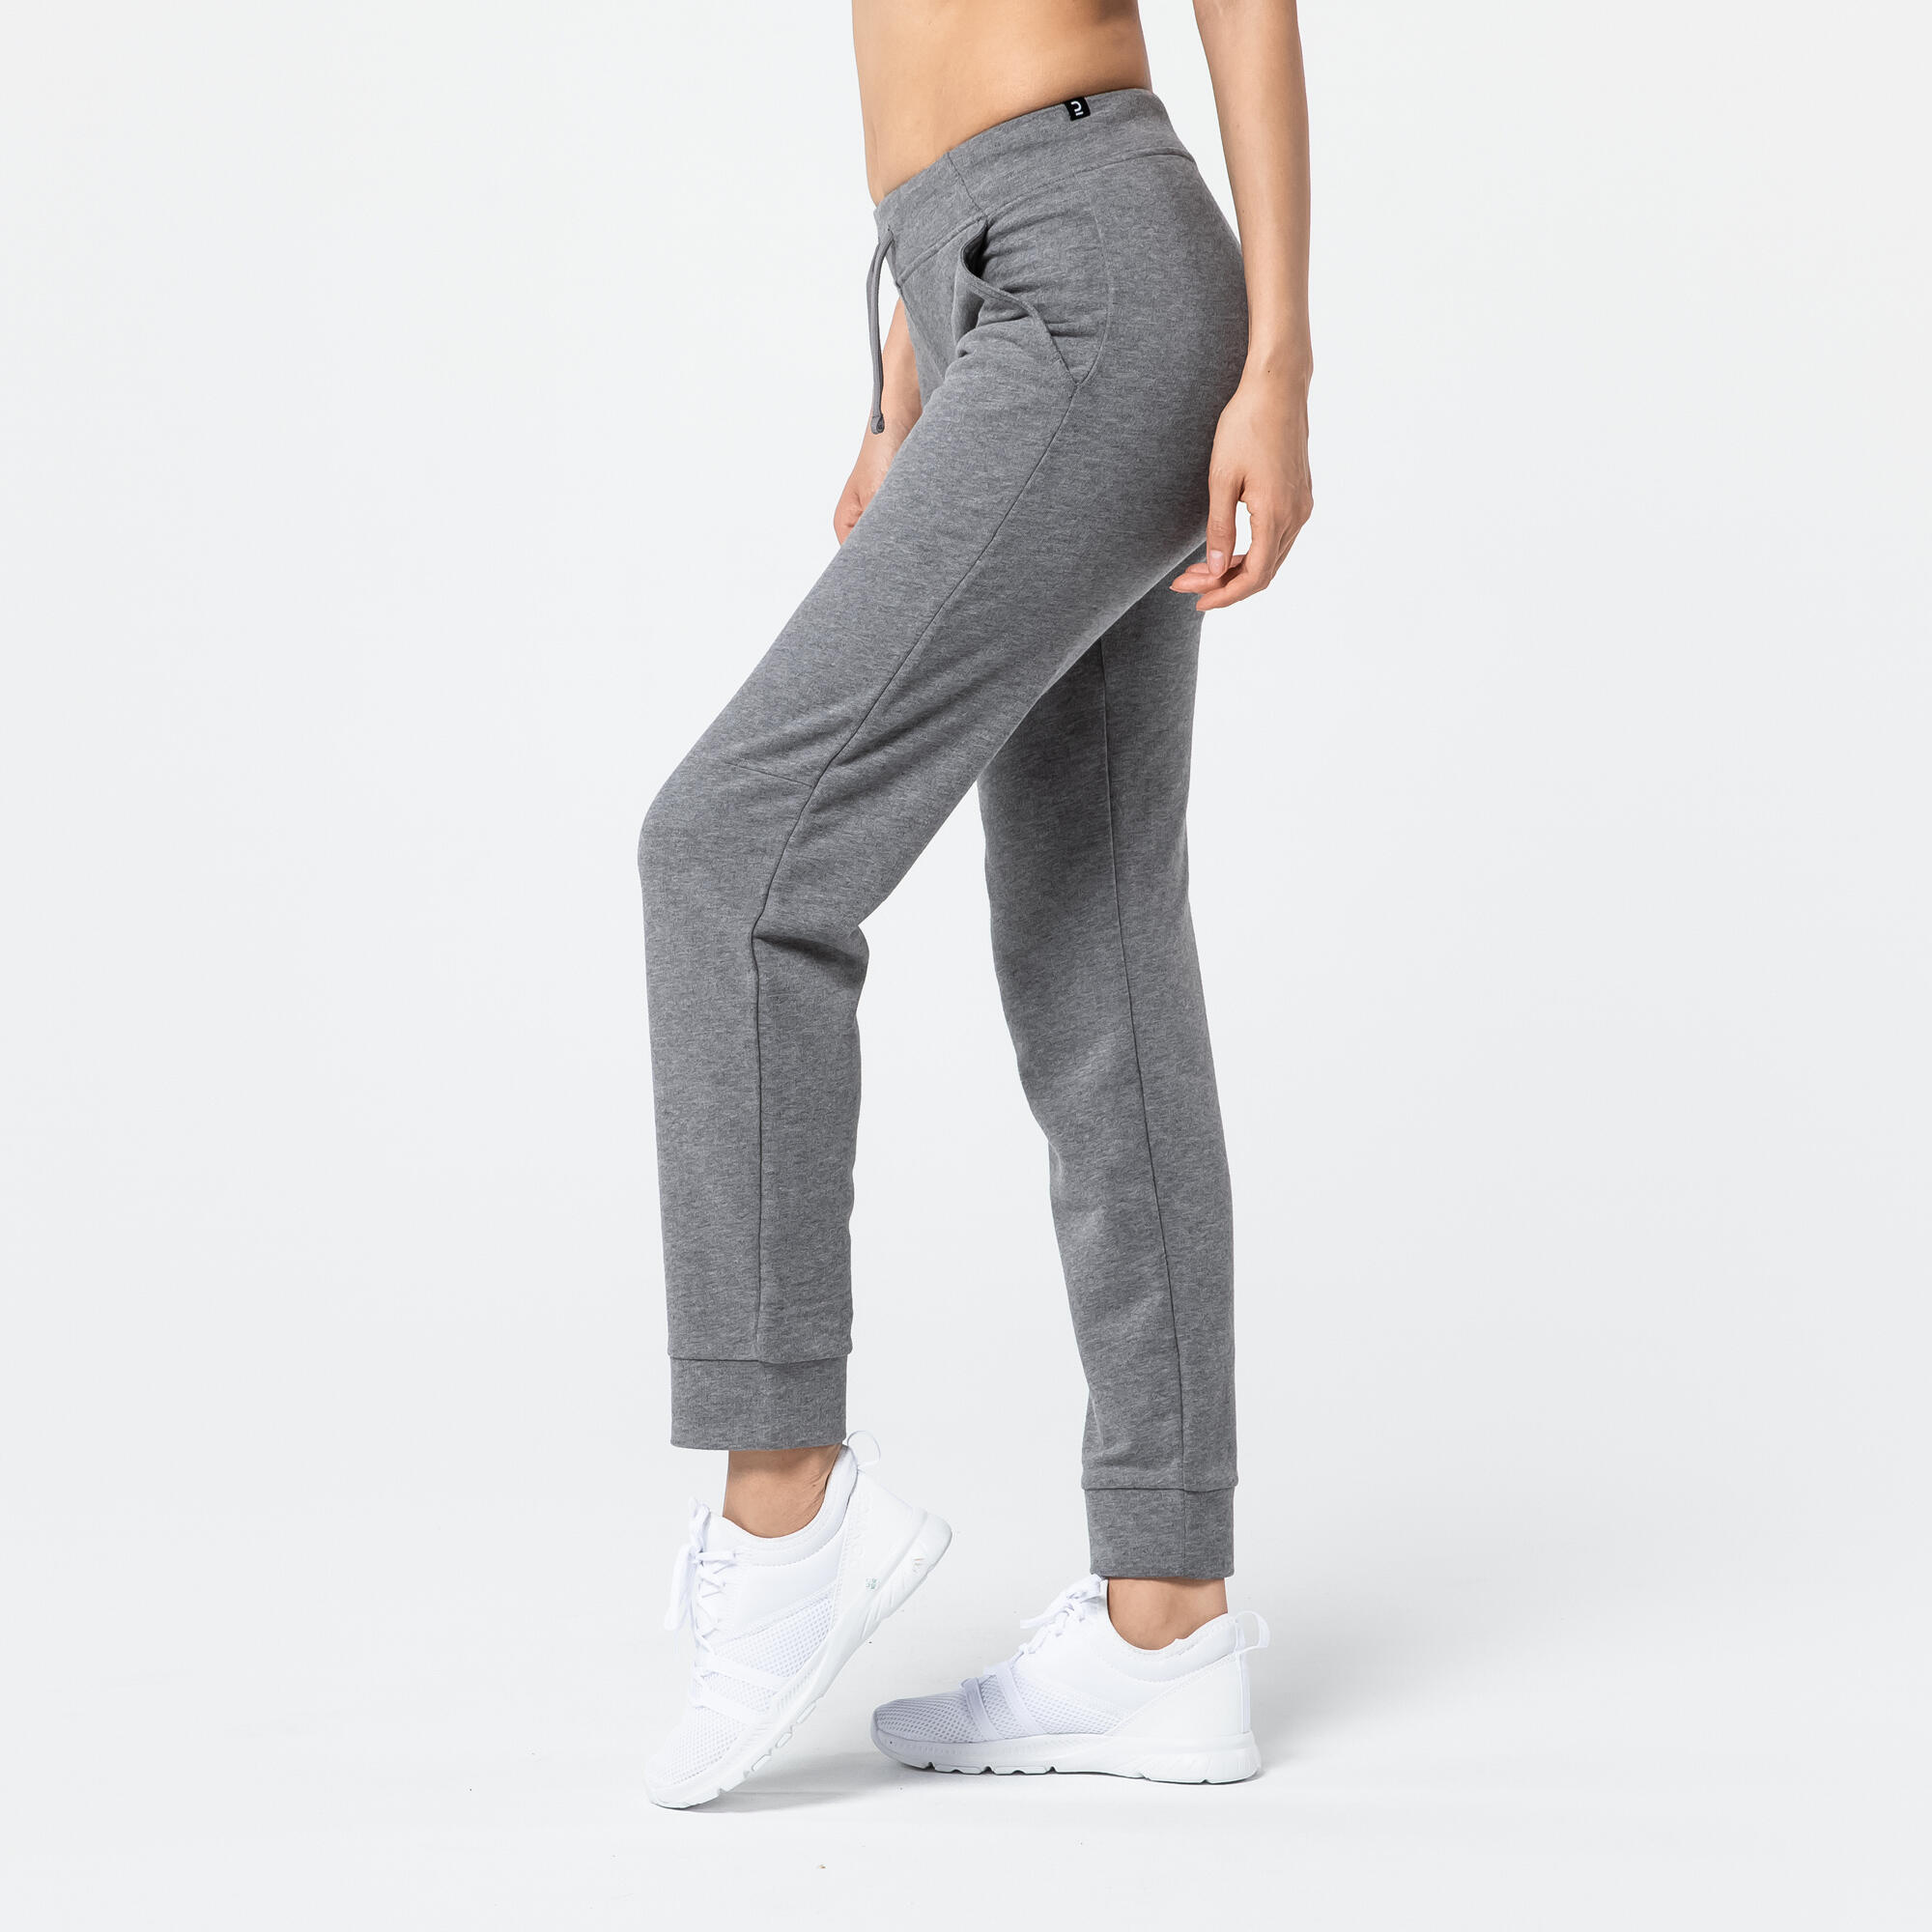 Women's Straight Cut Cotton Jogging Fitness Bottoms With Pocket 500 - Grey 1/5